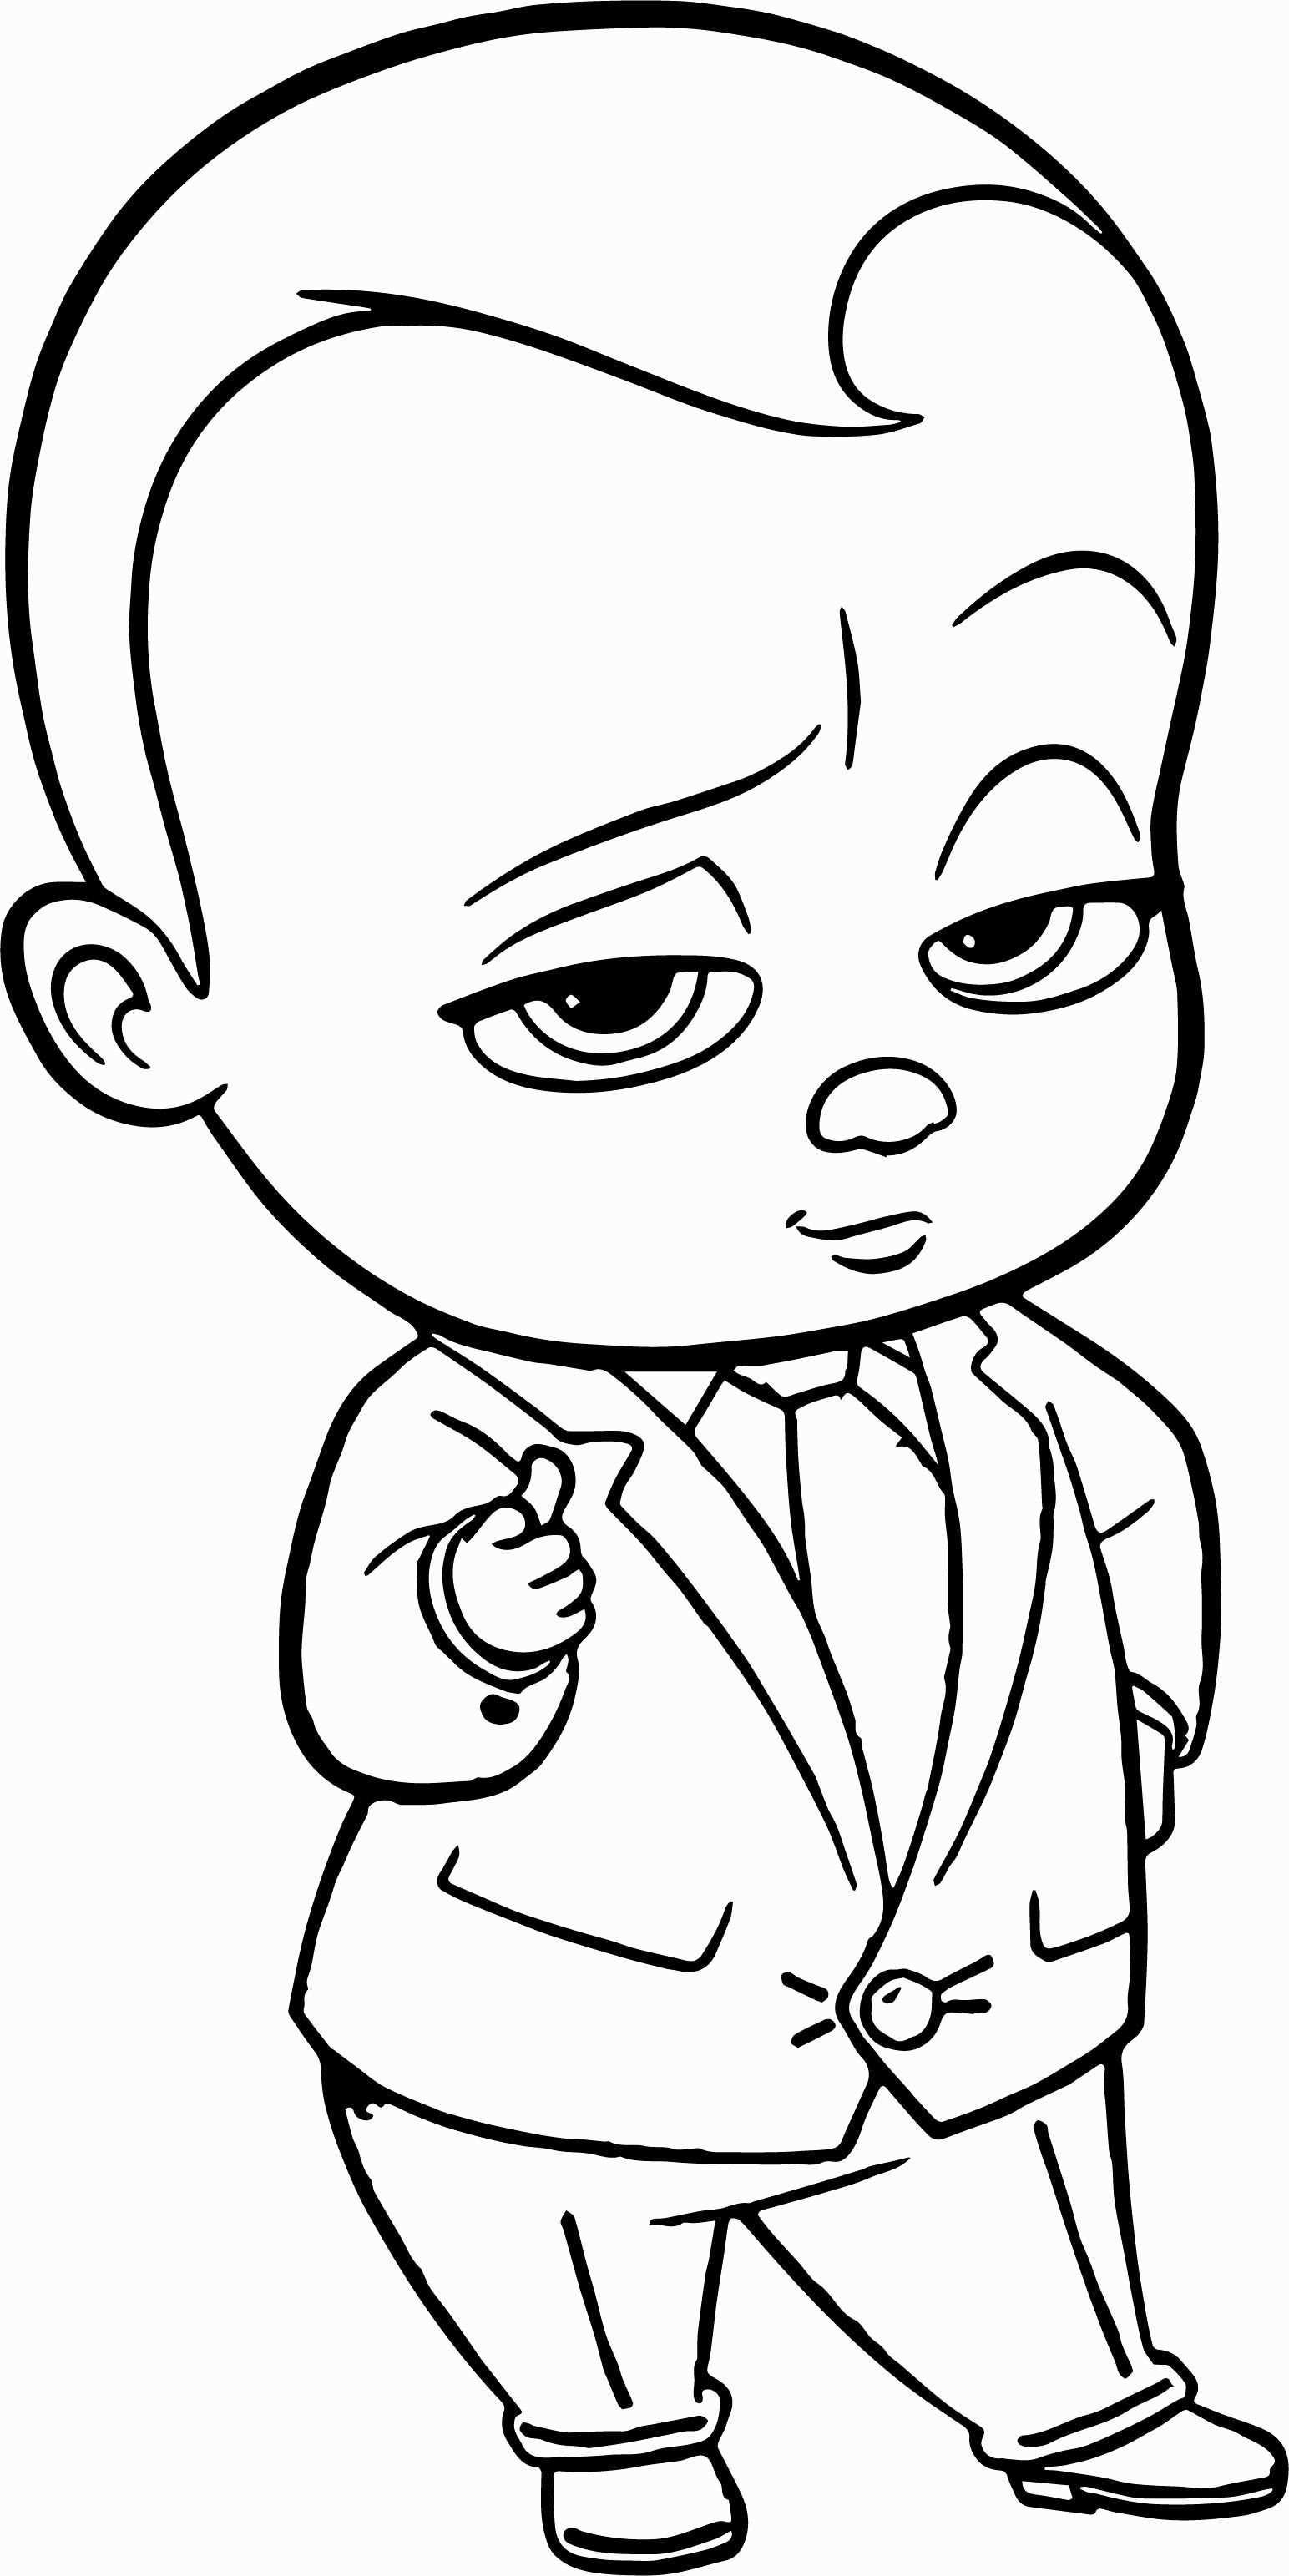 Boss Baby Coloring Page Elegant The Boss Baby Coloring Pages Baby Coloring Pages Cart